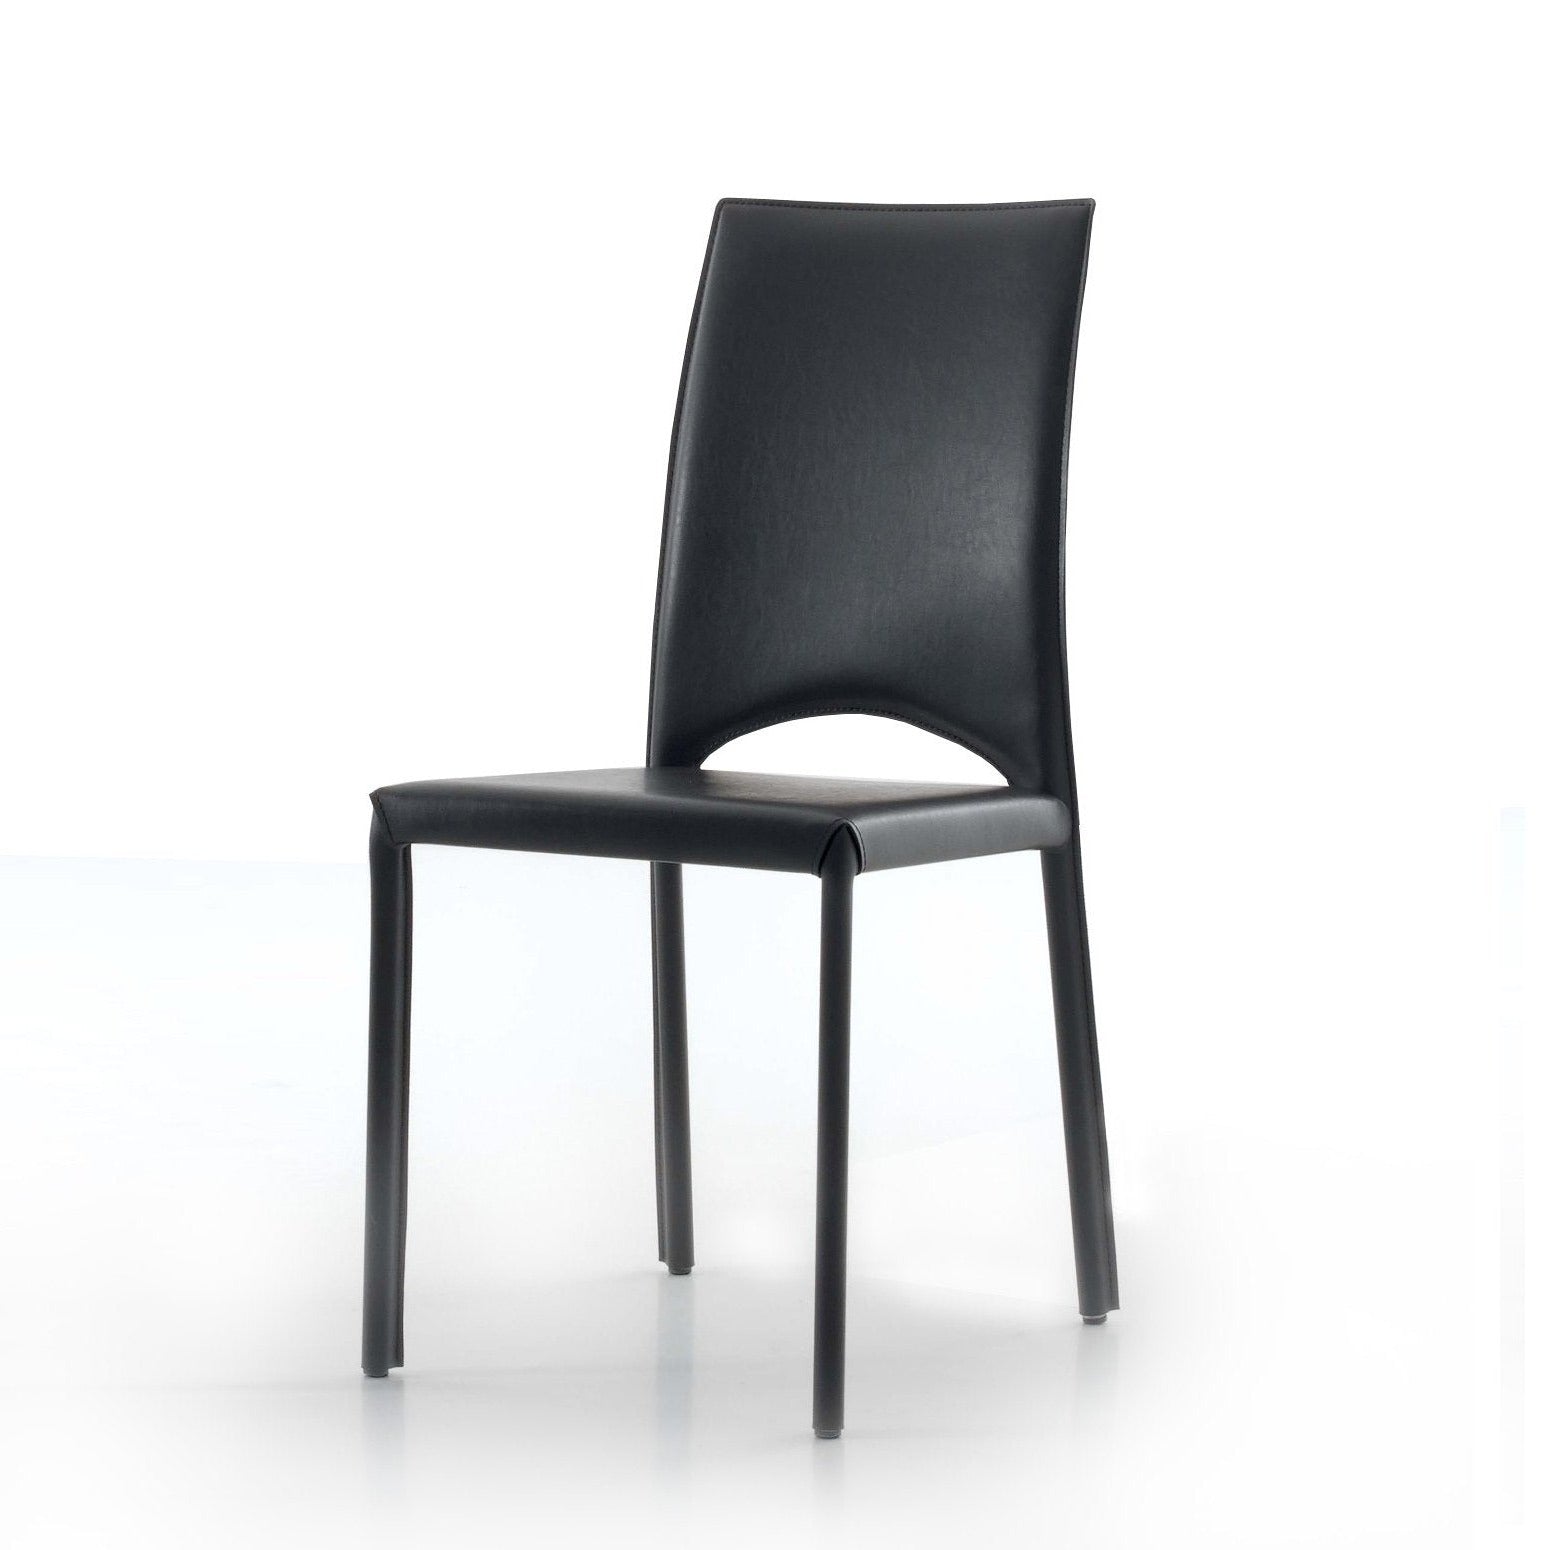 Mary elegant upholstered dining chair by Compar